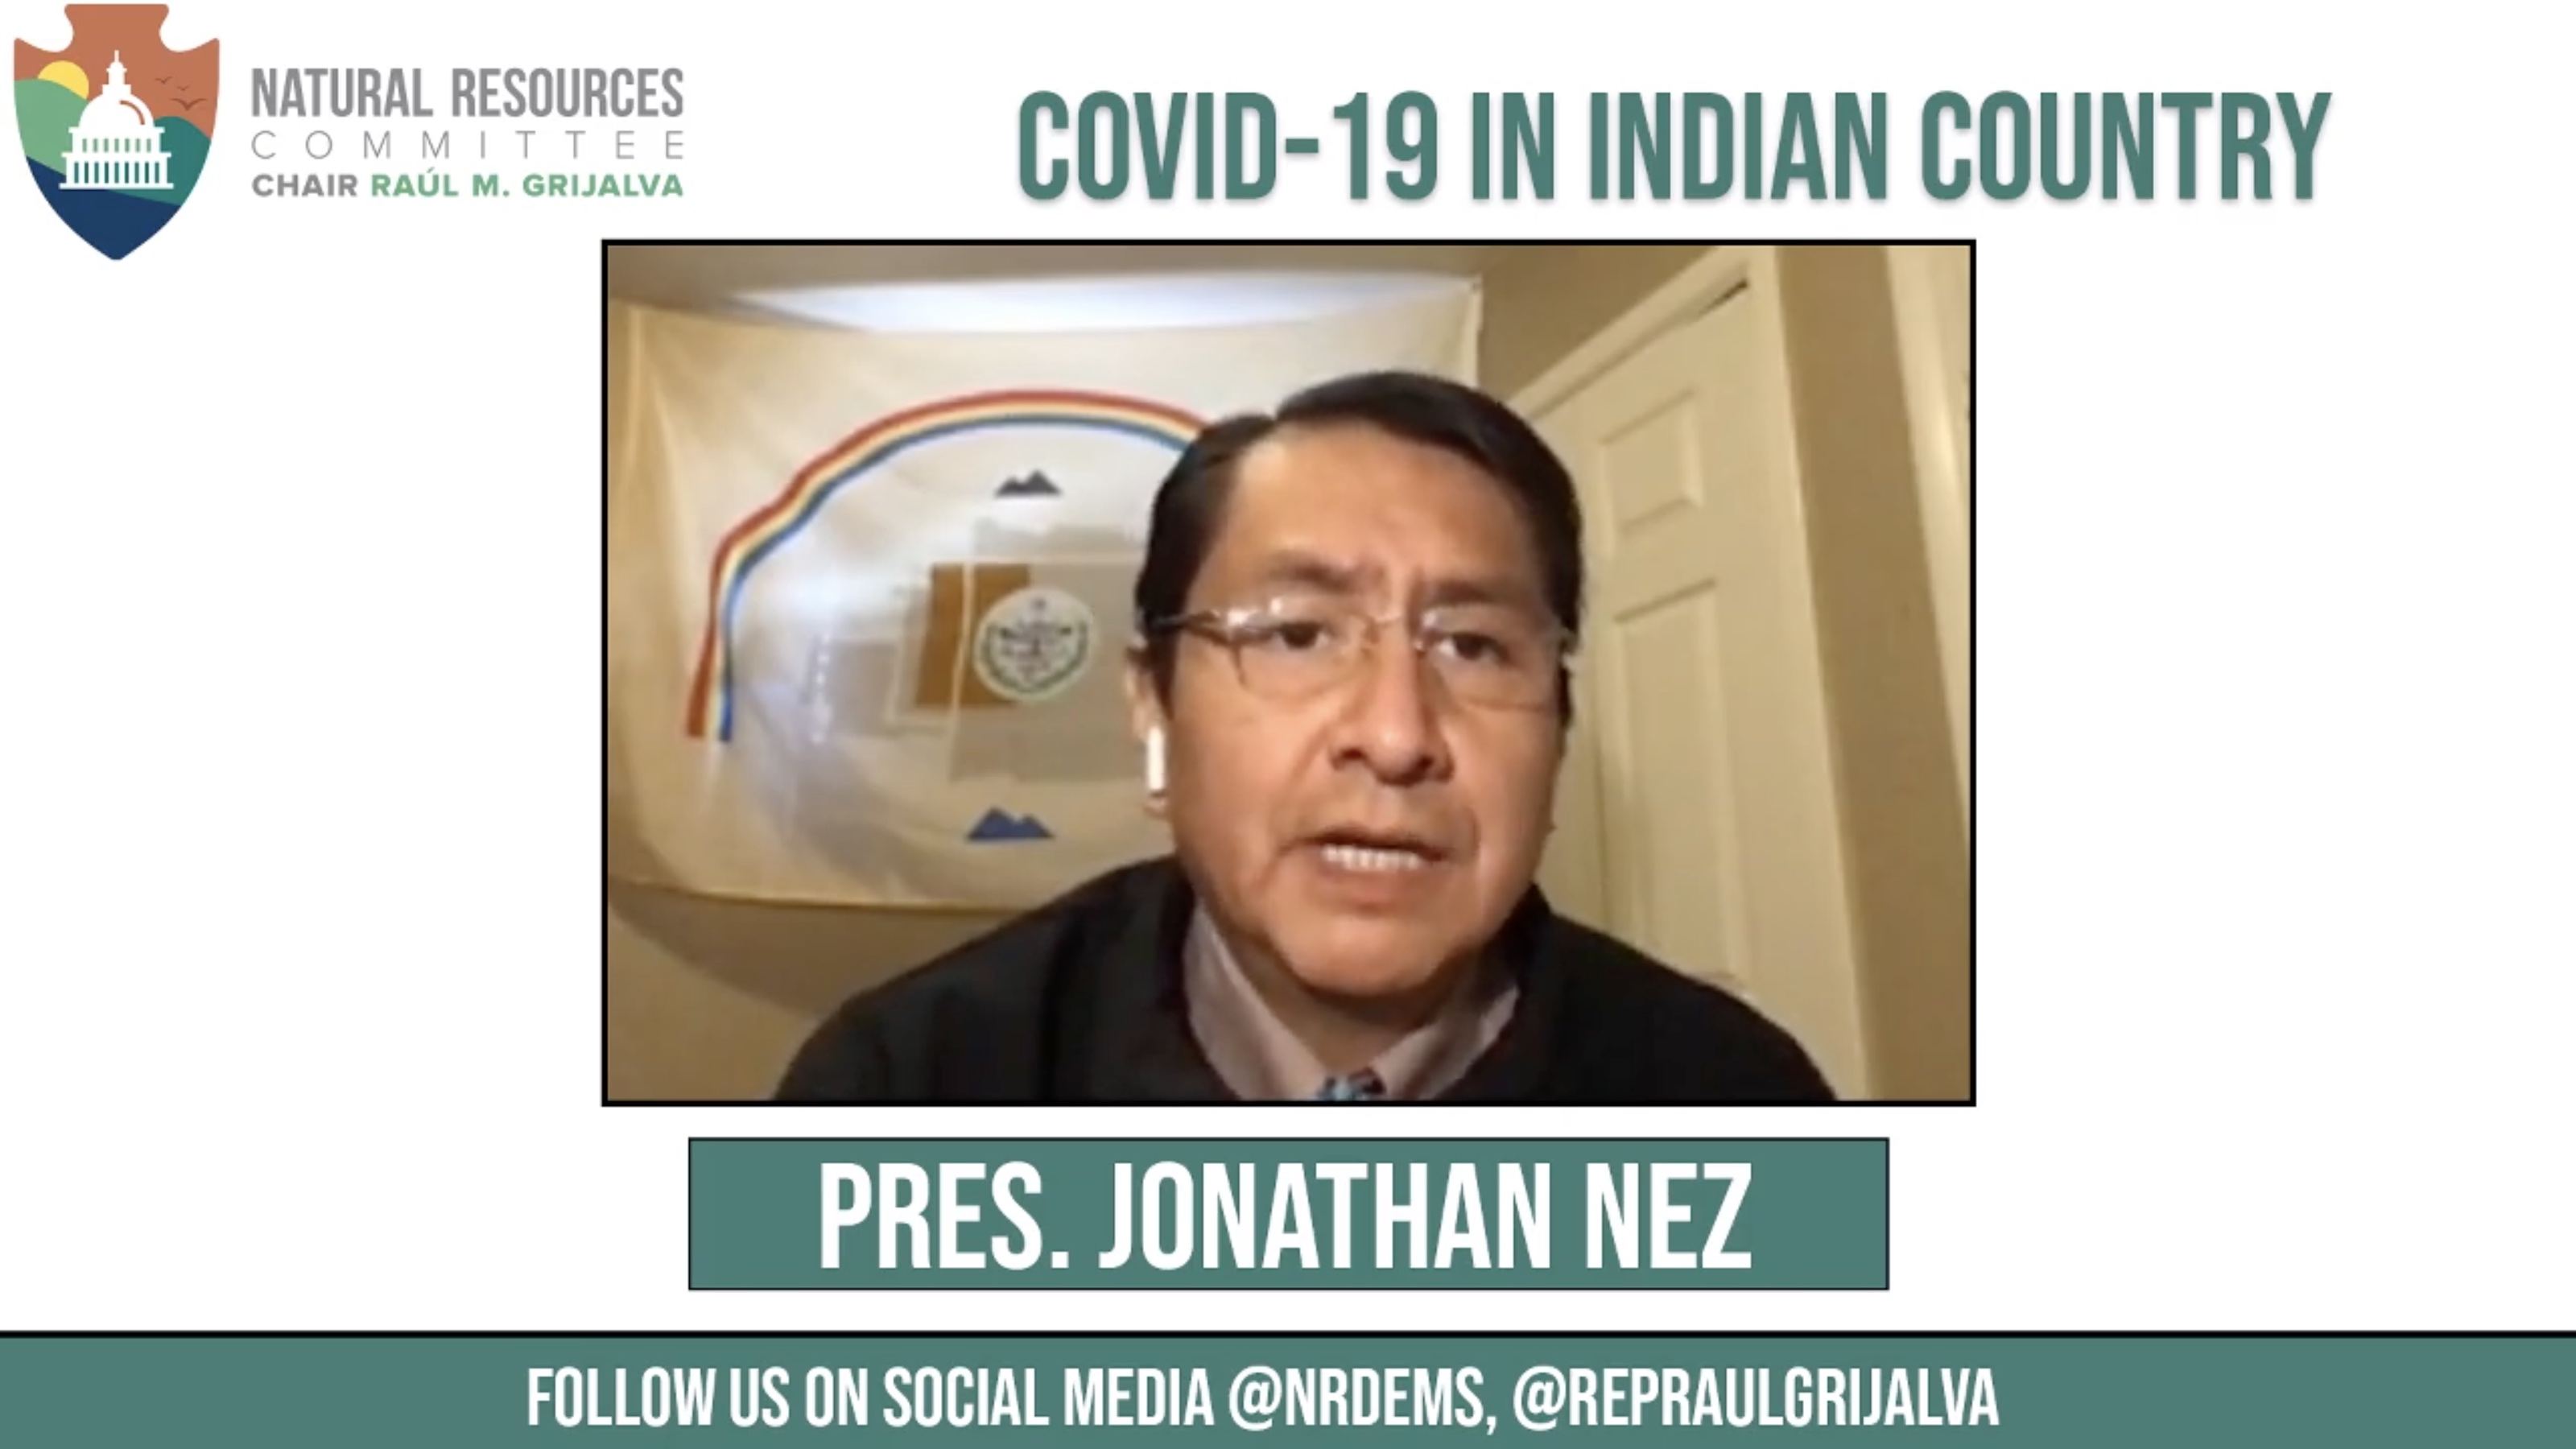 Tribal leaders struggle against 'very slow' allocation of COVID-19 aid